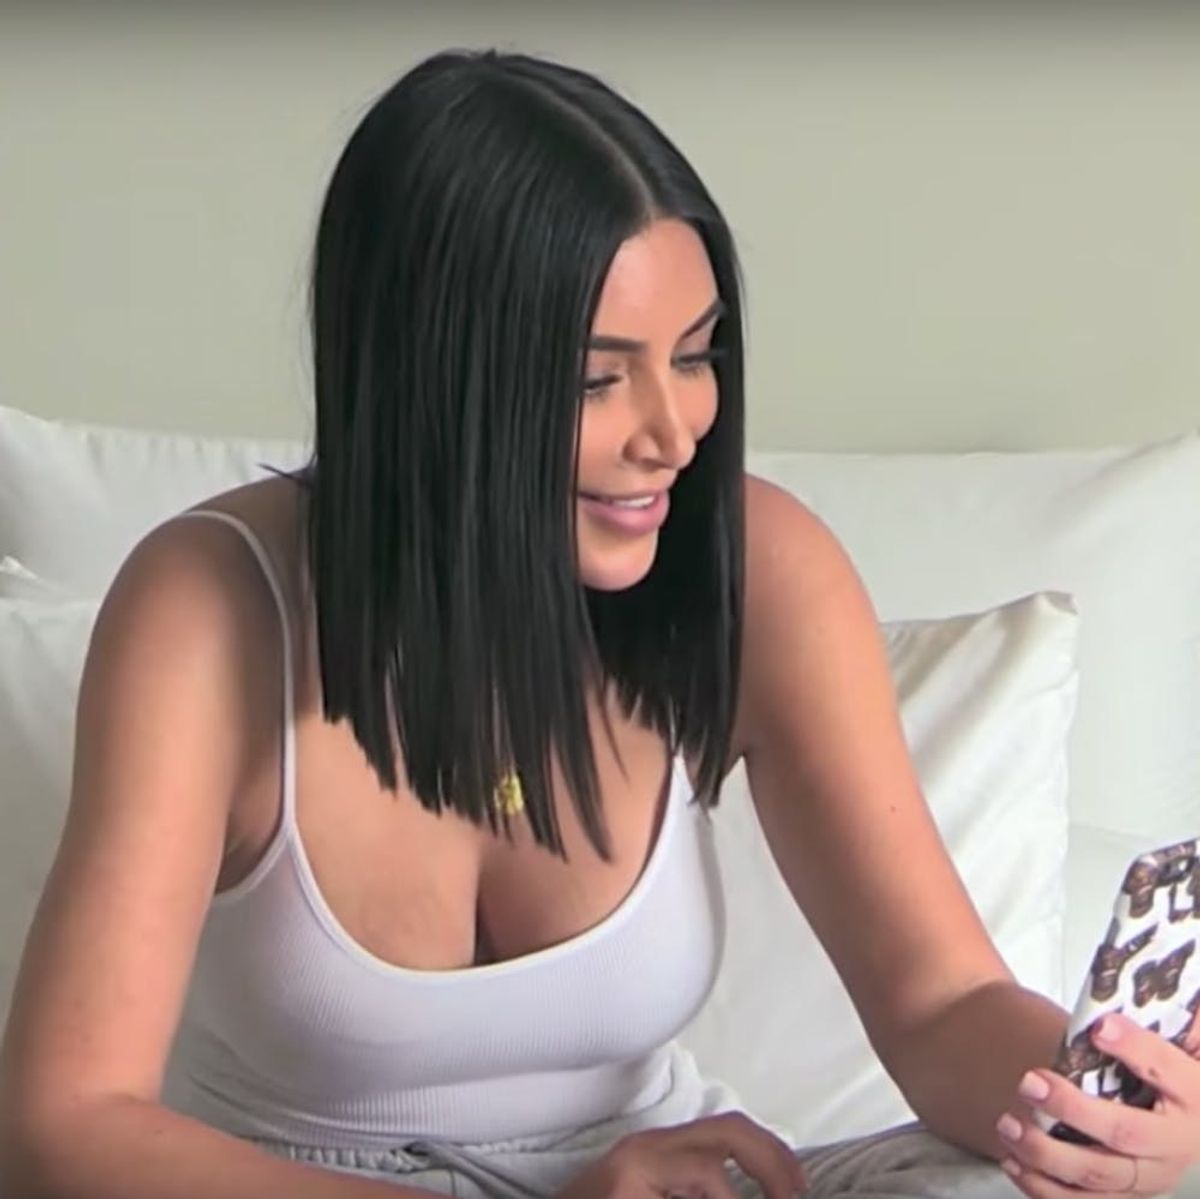 Kim Kardashian West Says “We’re Having a Baby!” in KUWTK’s Dramatic New Teaser